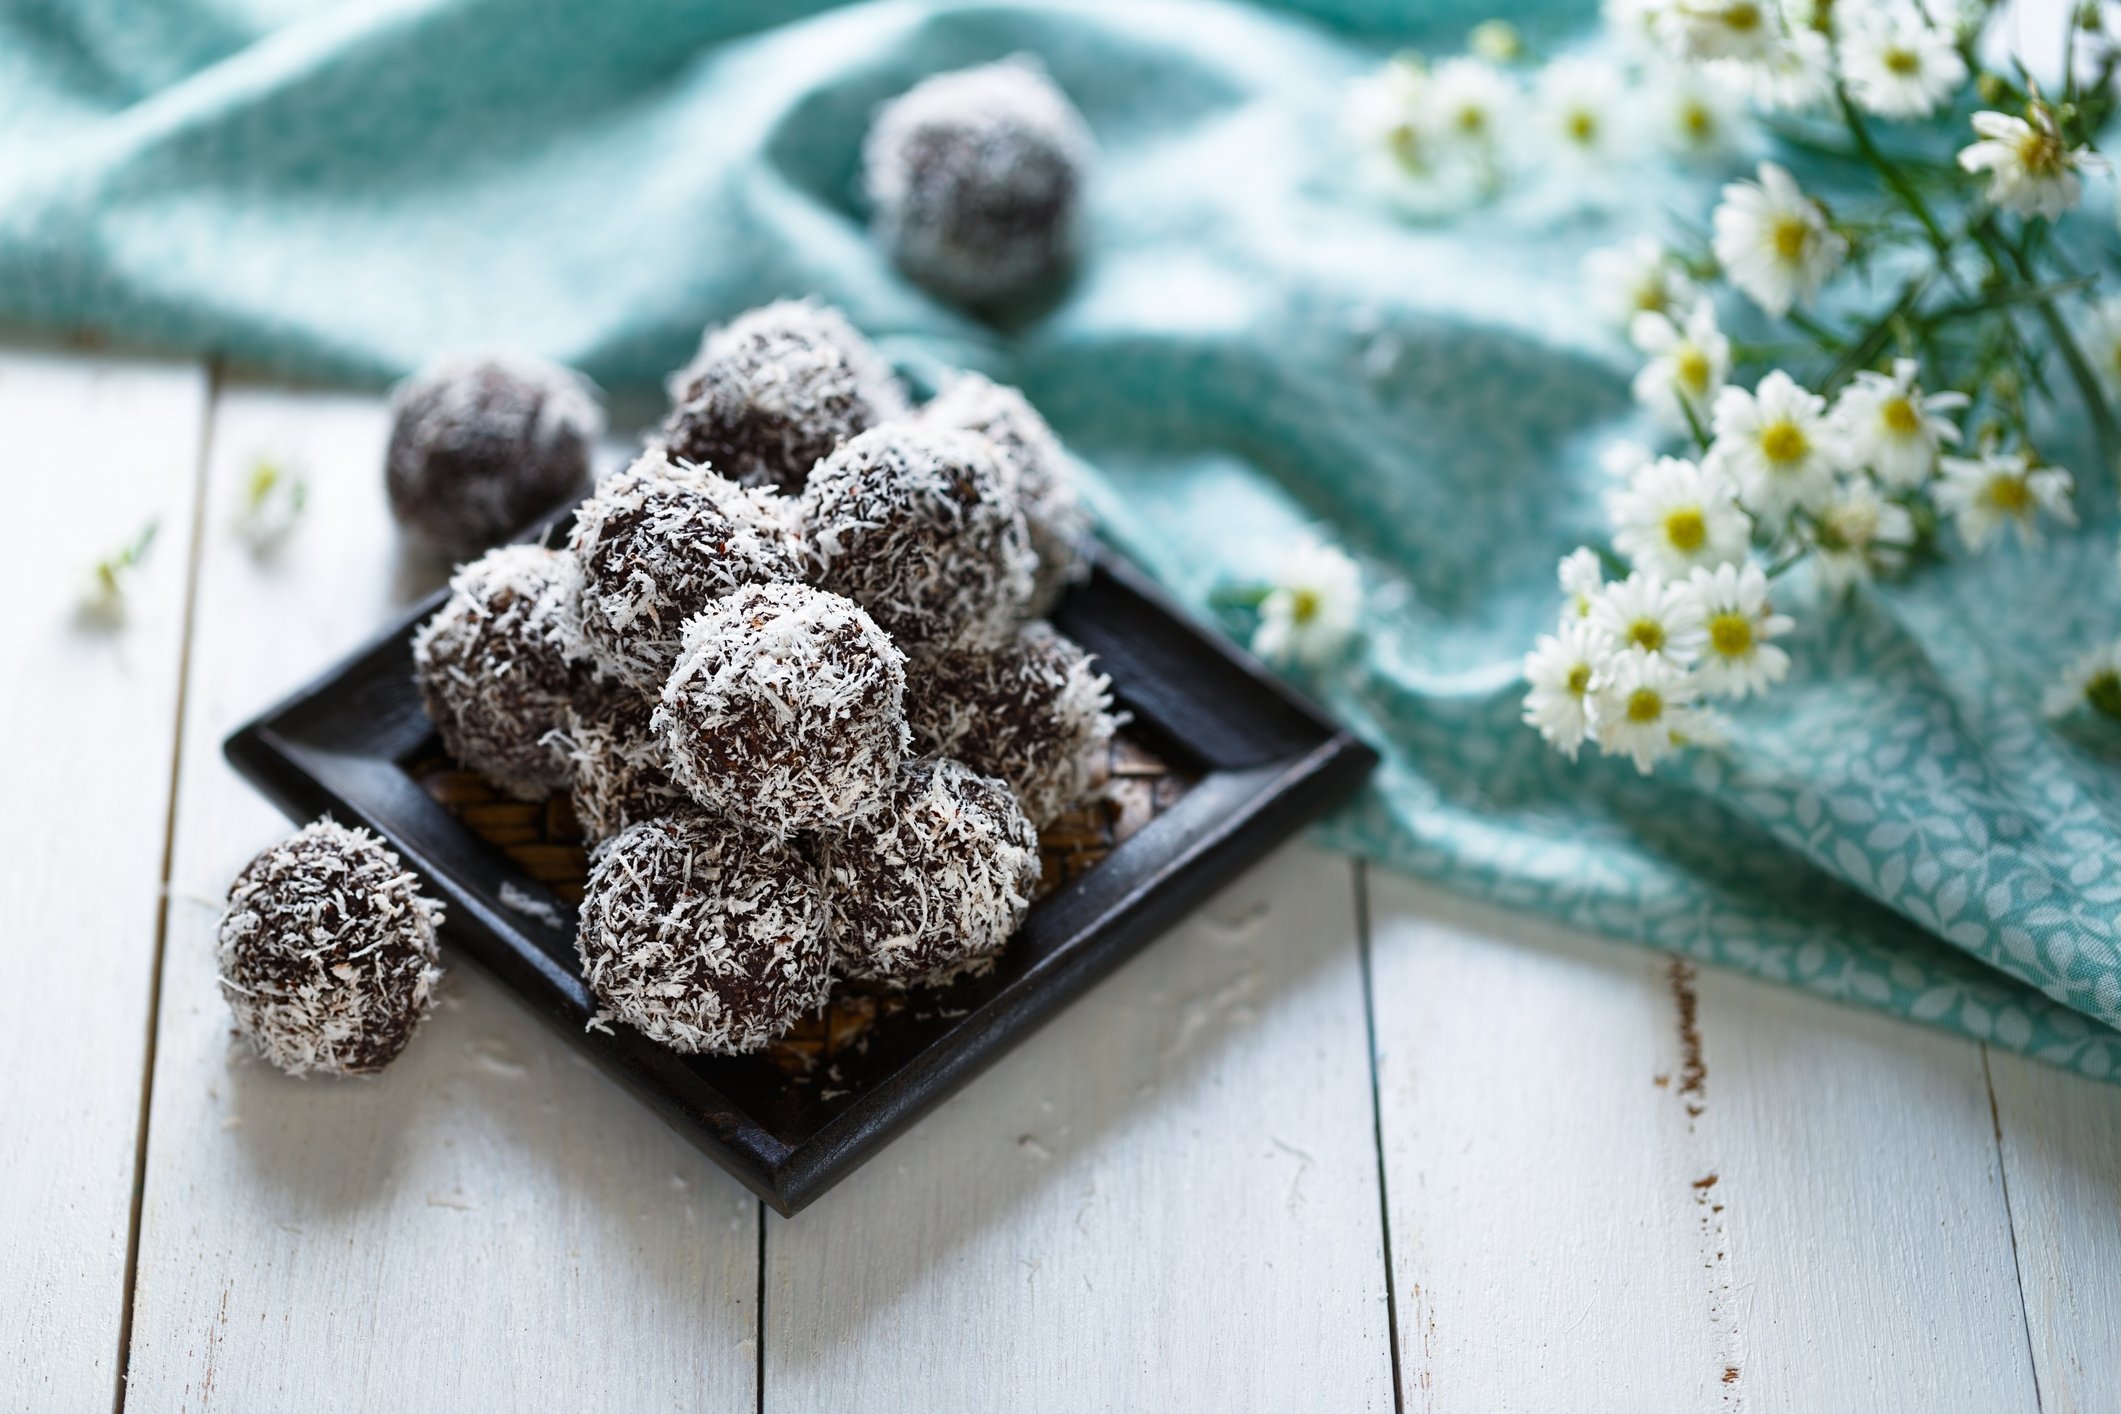 Covering the date balls in shredded coconut not only adds flavor but also visual appeal. (iStock Photo)